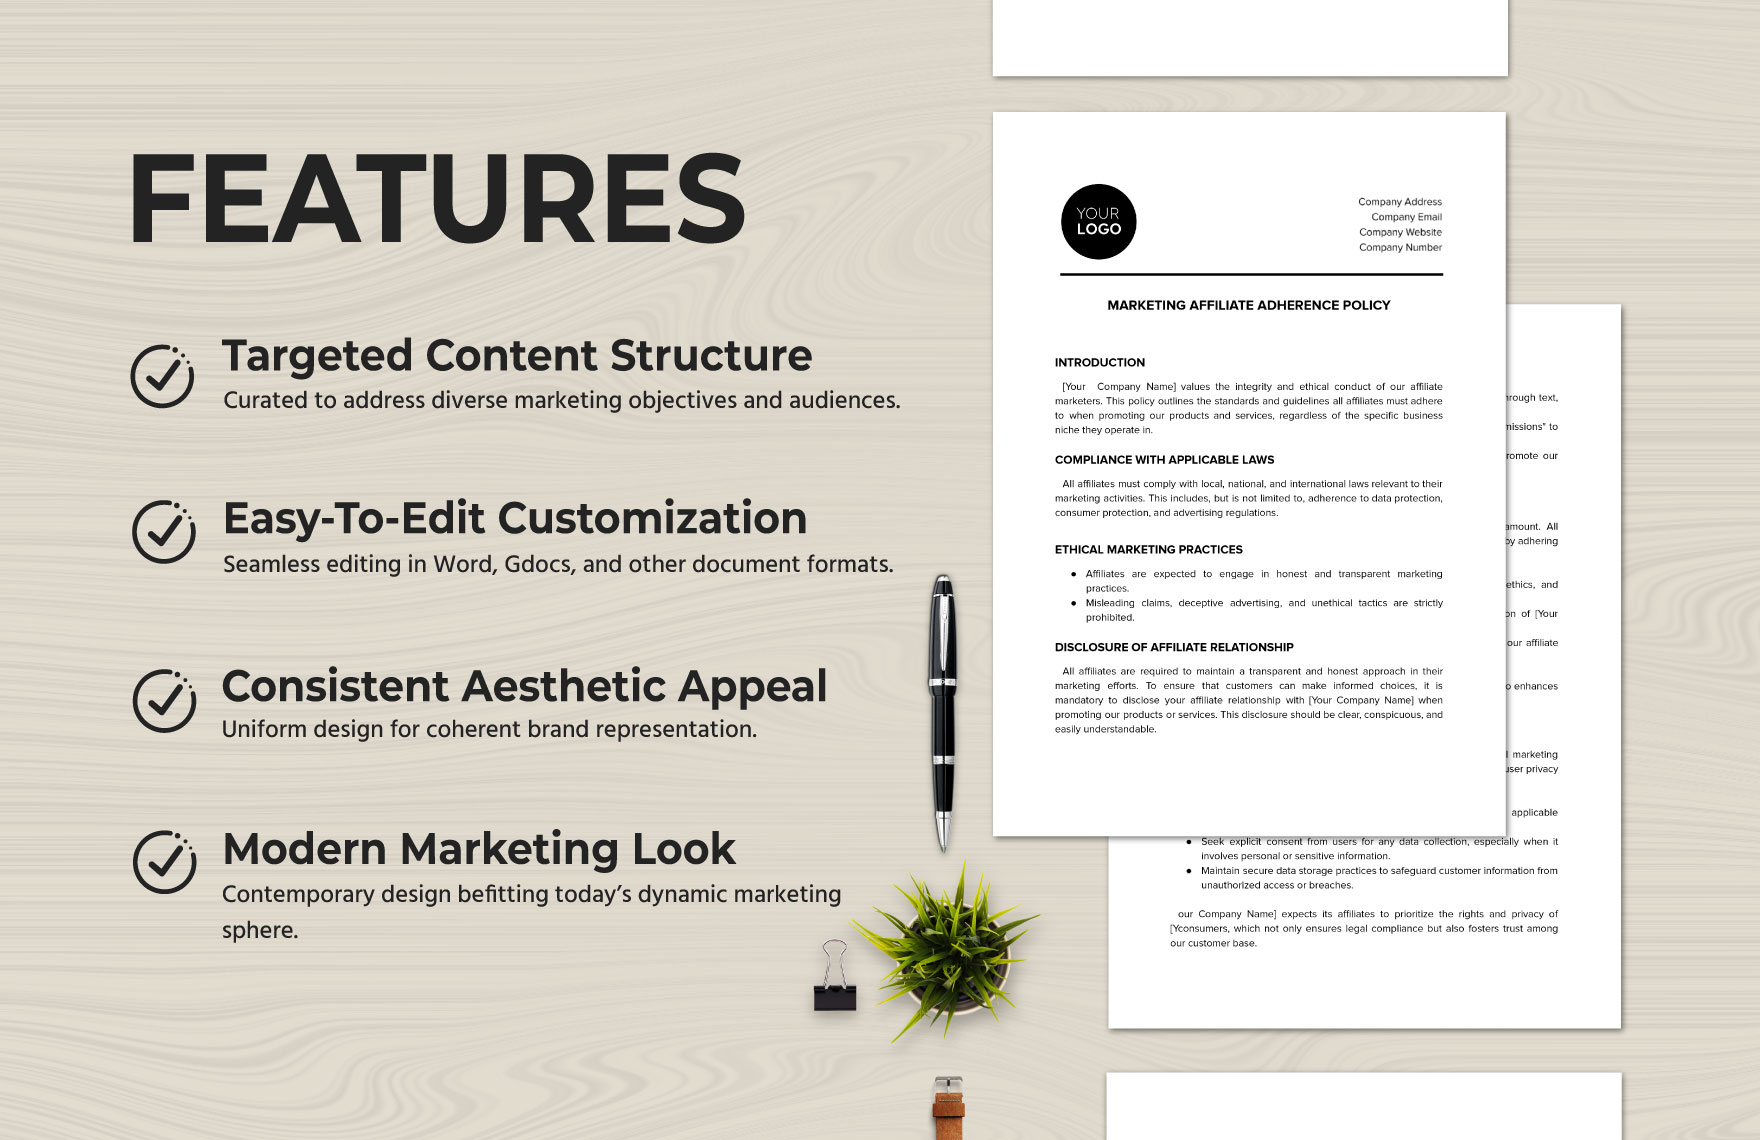 Marketing Affiliate Adherence Policy Template